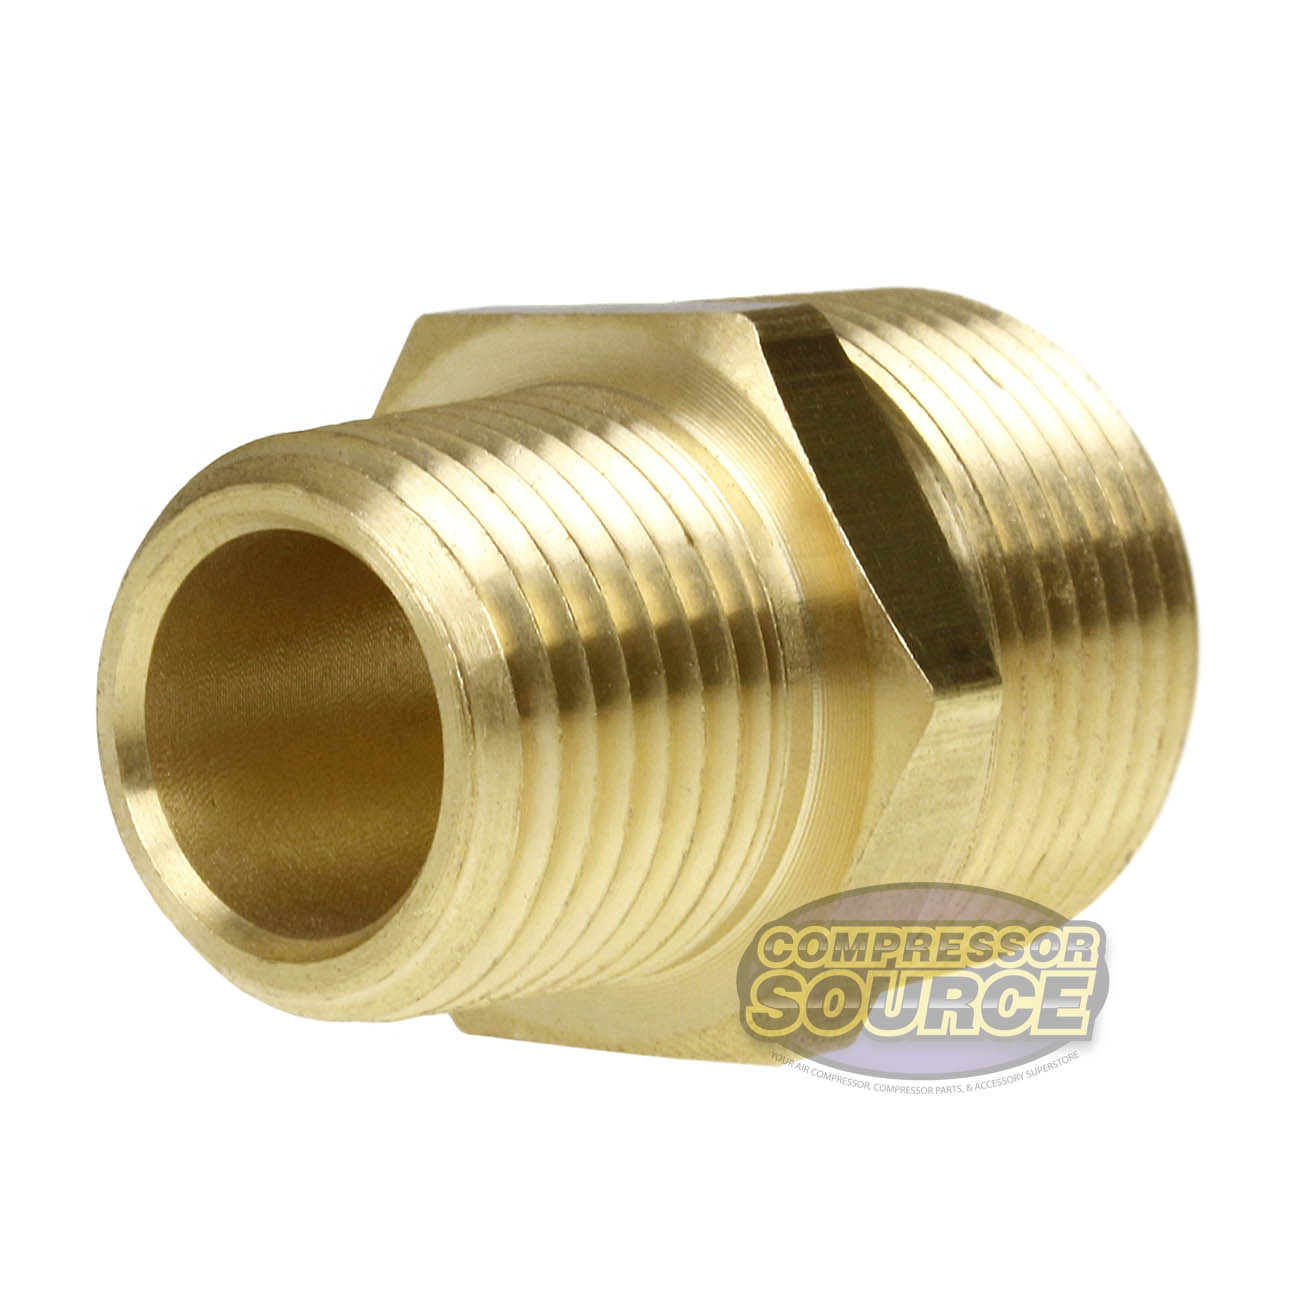 3/4" x 1/2" Male NPTF Pipe Reducing Hex Nipple Solid Brass Pipe Fitting New